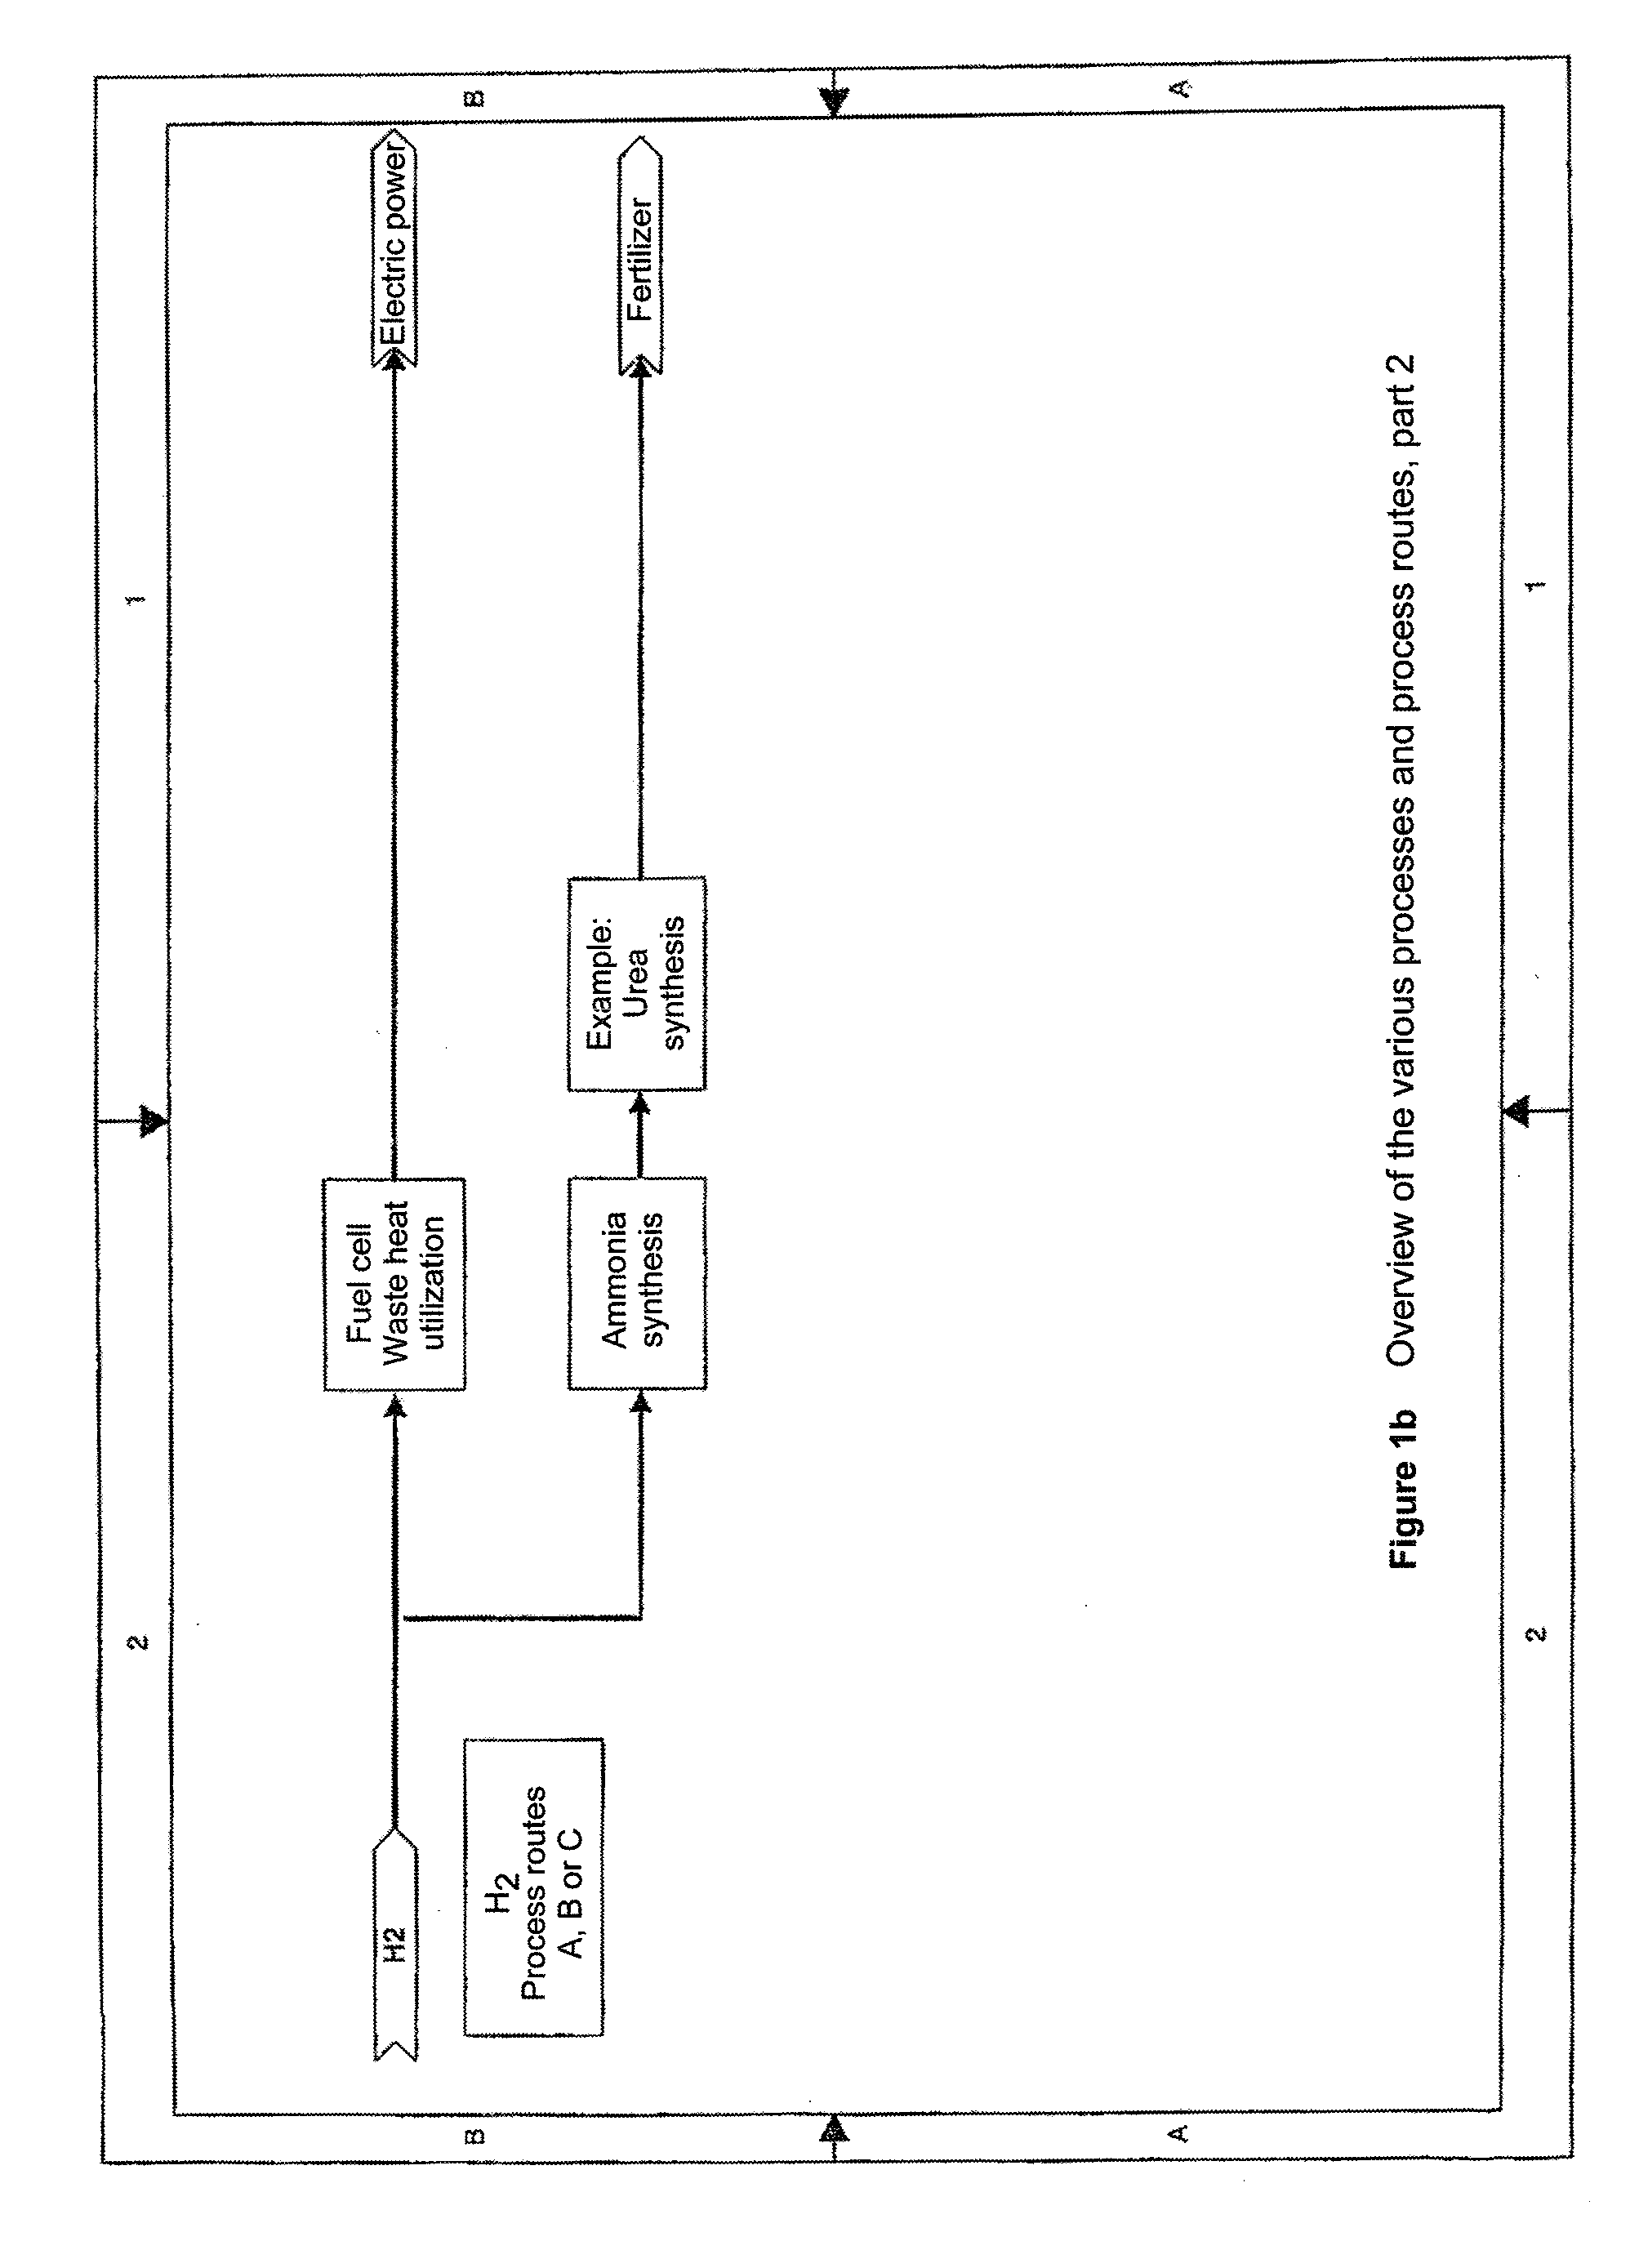 Method and device for producing energy, dme (dimethyl ether) and bio-silica using co2-neutral biogenic reactive and inert ingredients